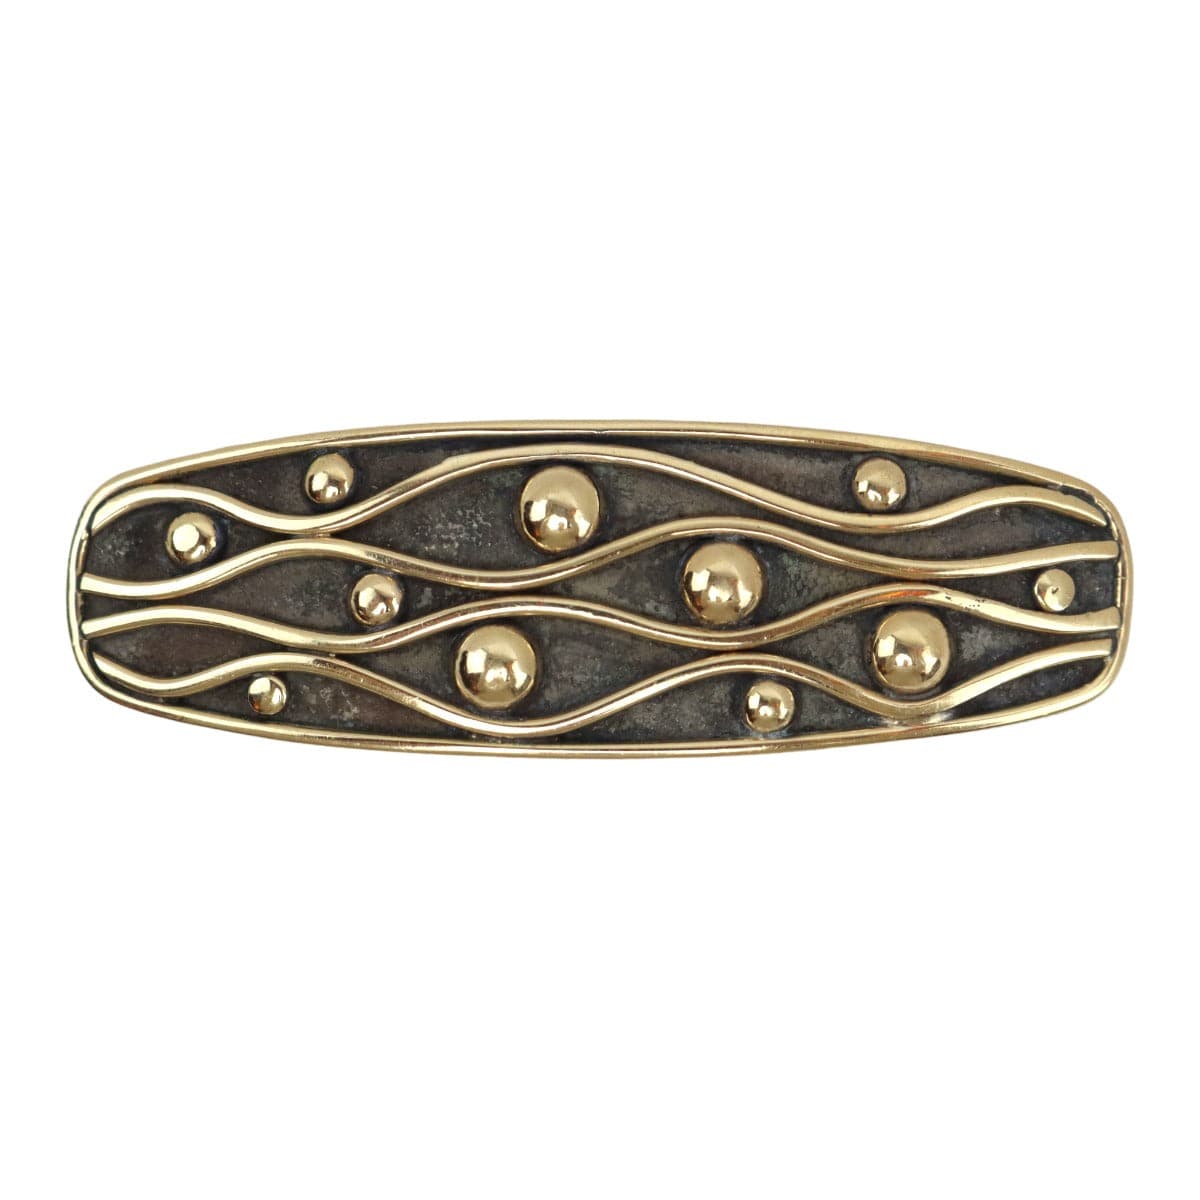 Frank Patania Jr. - Contemporary 14K Gold and Sterling Silver Hair Barrette, 0.75" x 2.5 (J91699-1022-044)